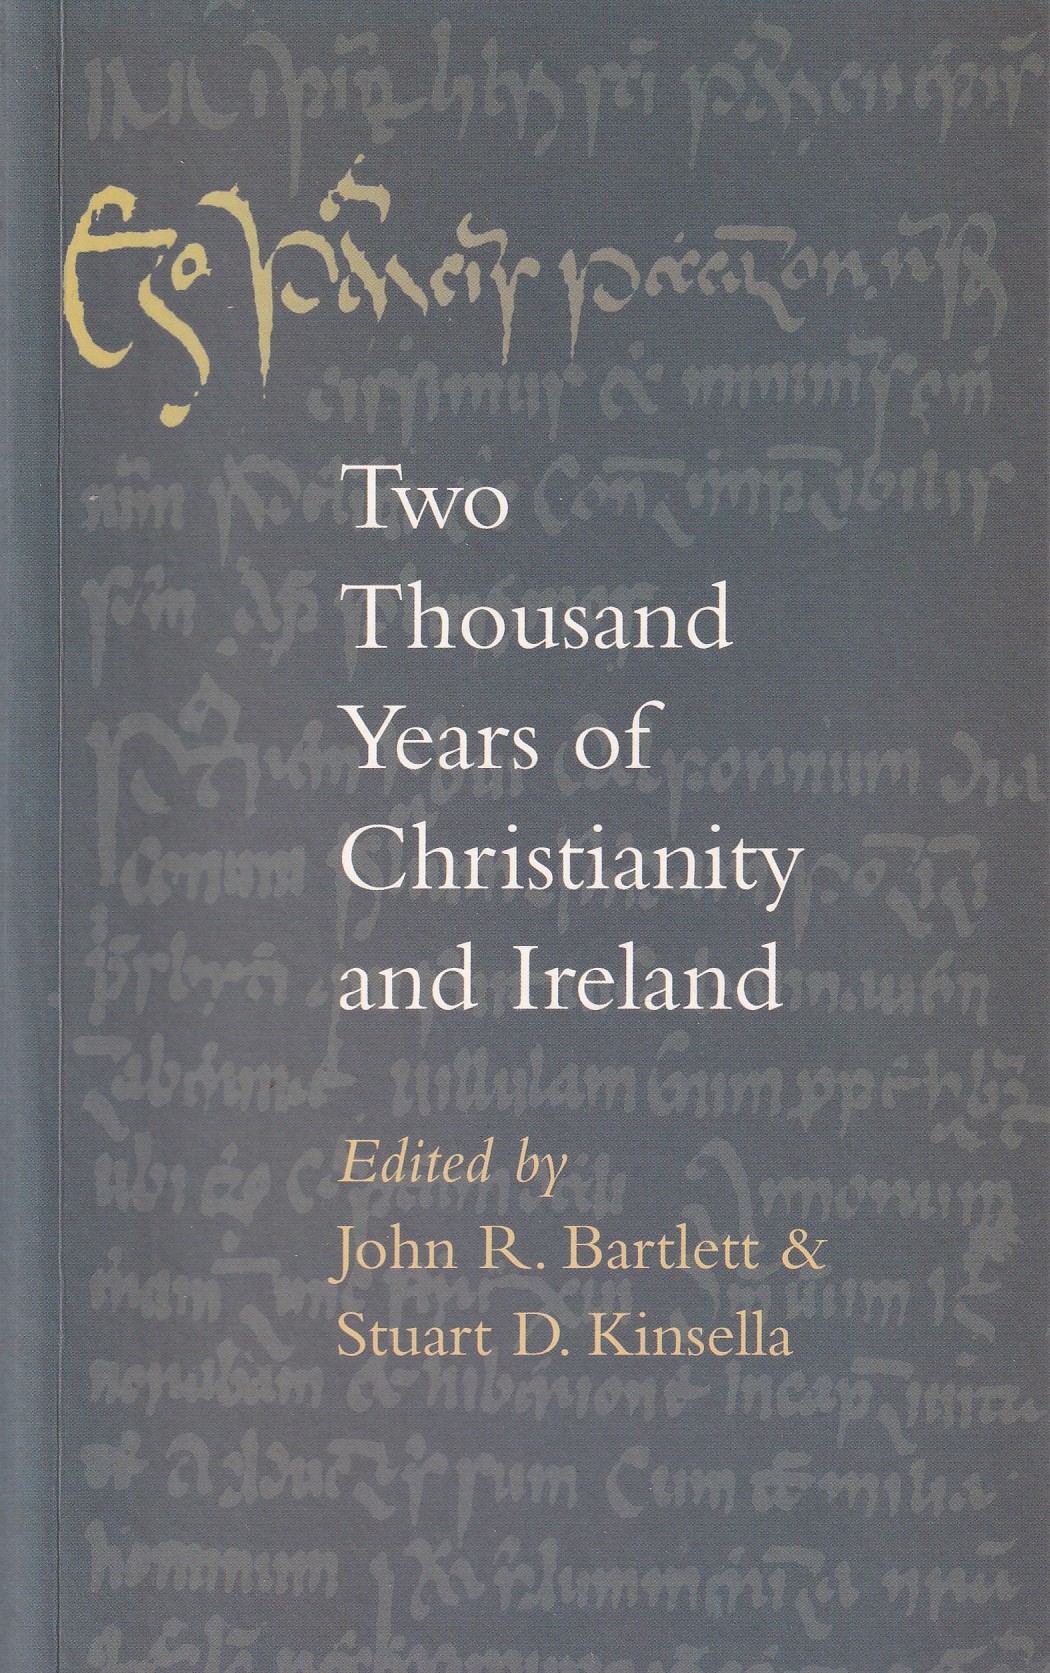 Two Thousand Years of Christianity and Ireland | John R. Bartlett, Stuart D. Kinsella (eds.) | Charlie Byrne's